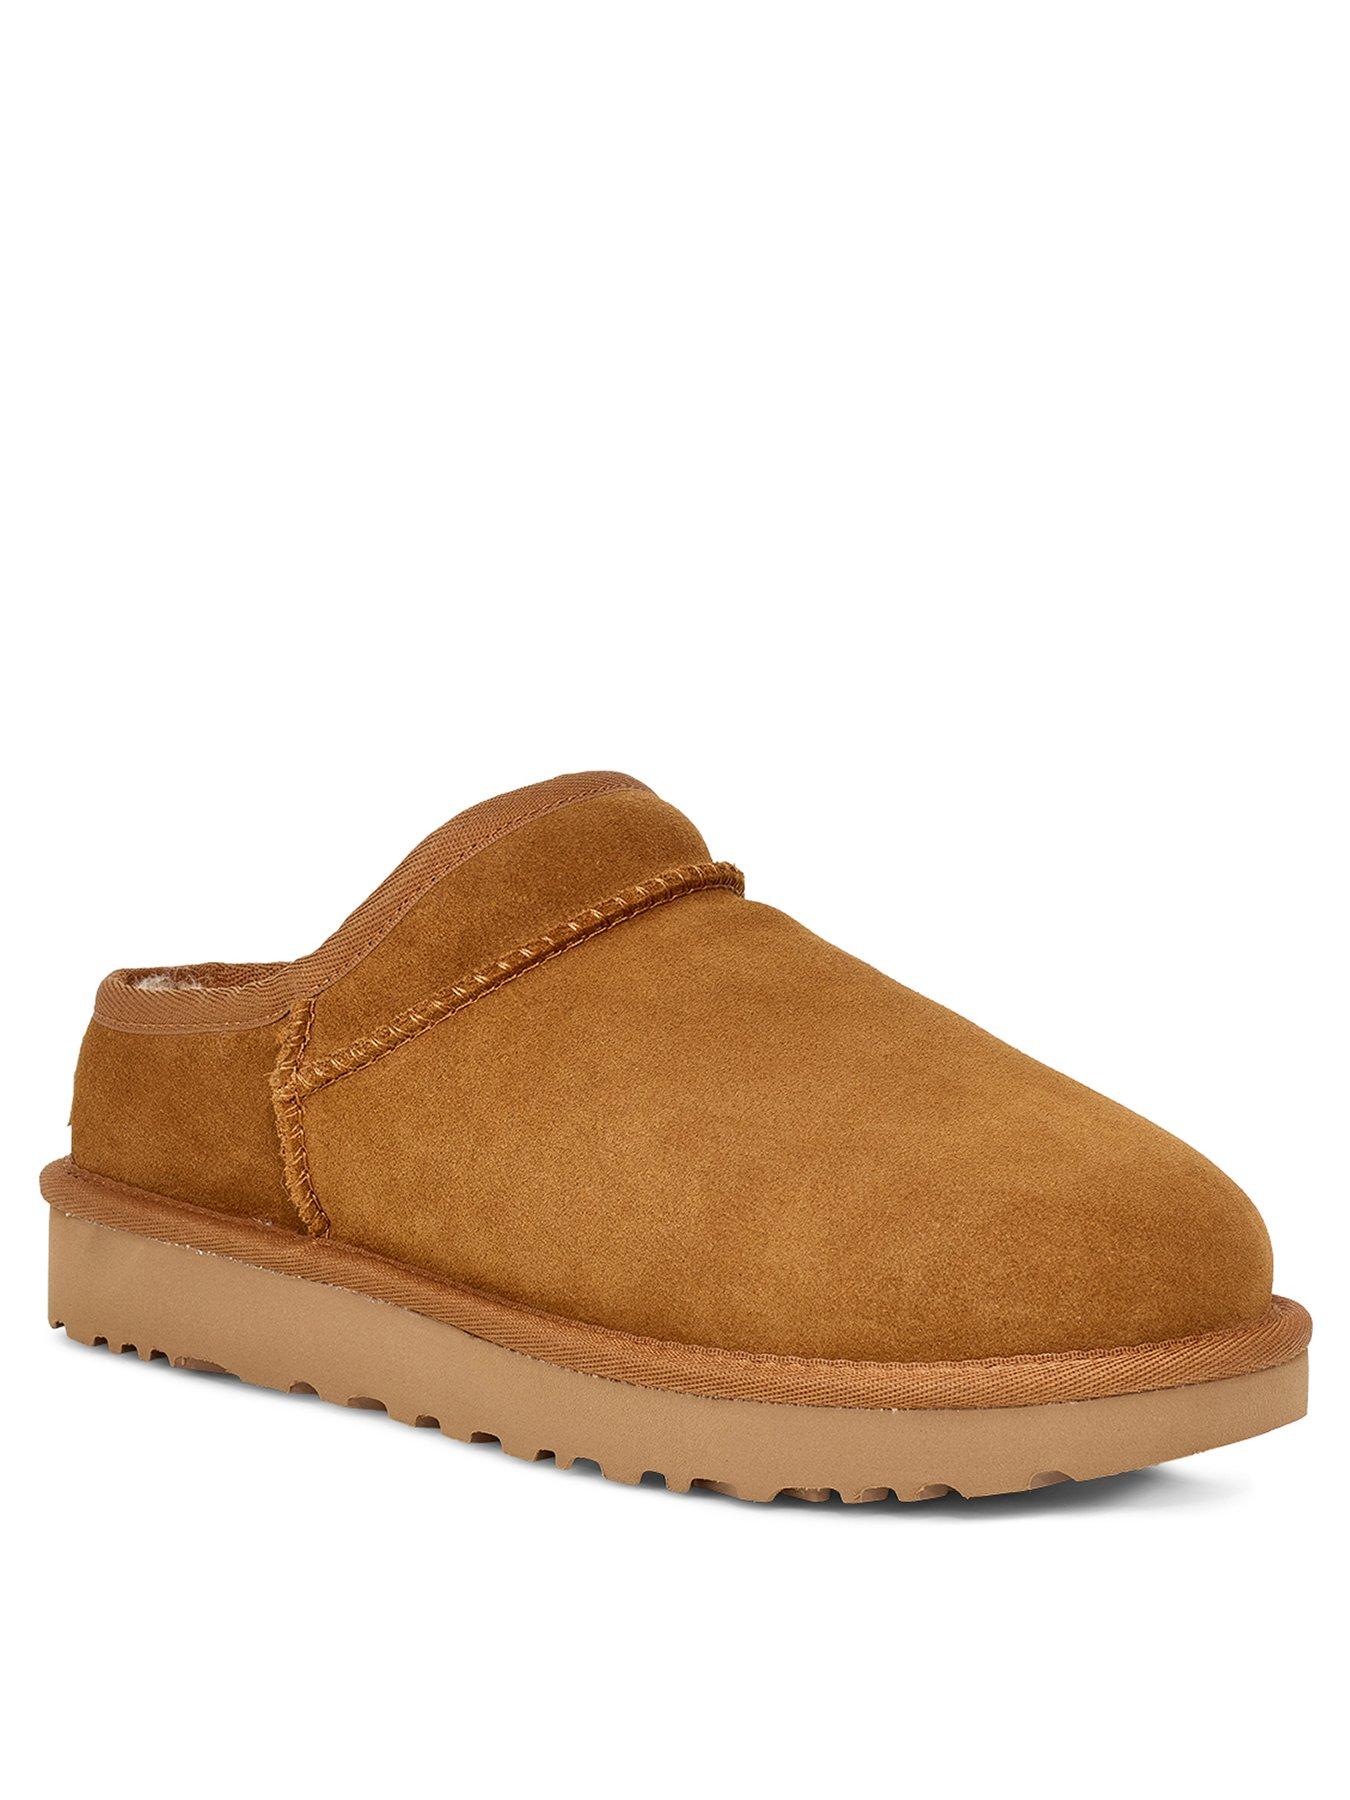 ugg classic slippers